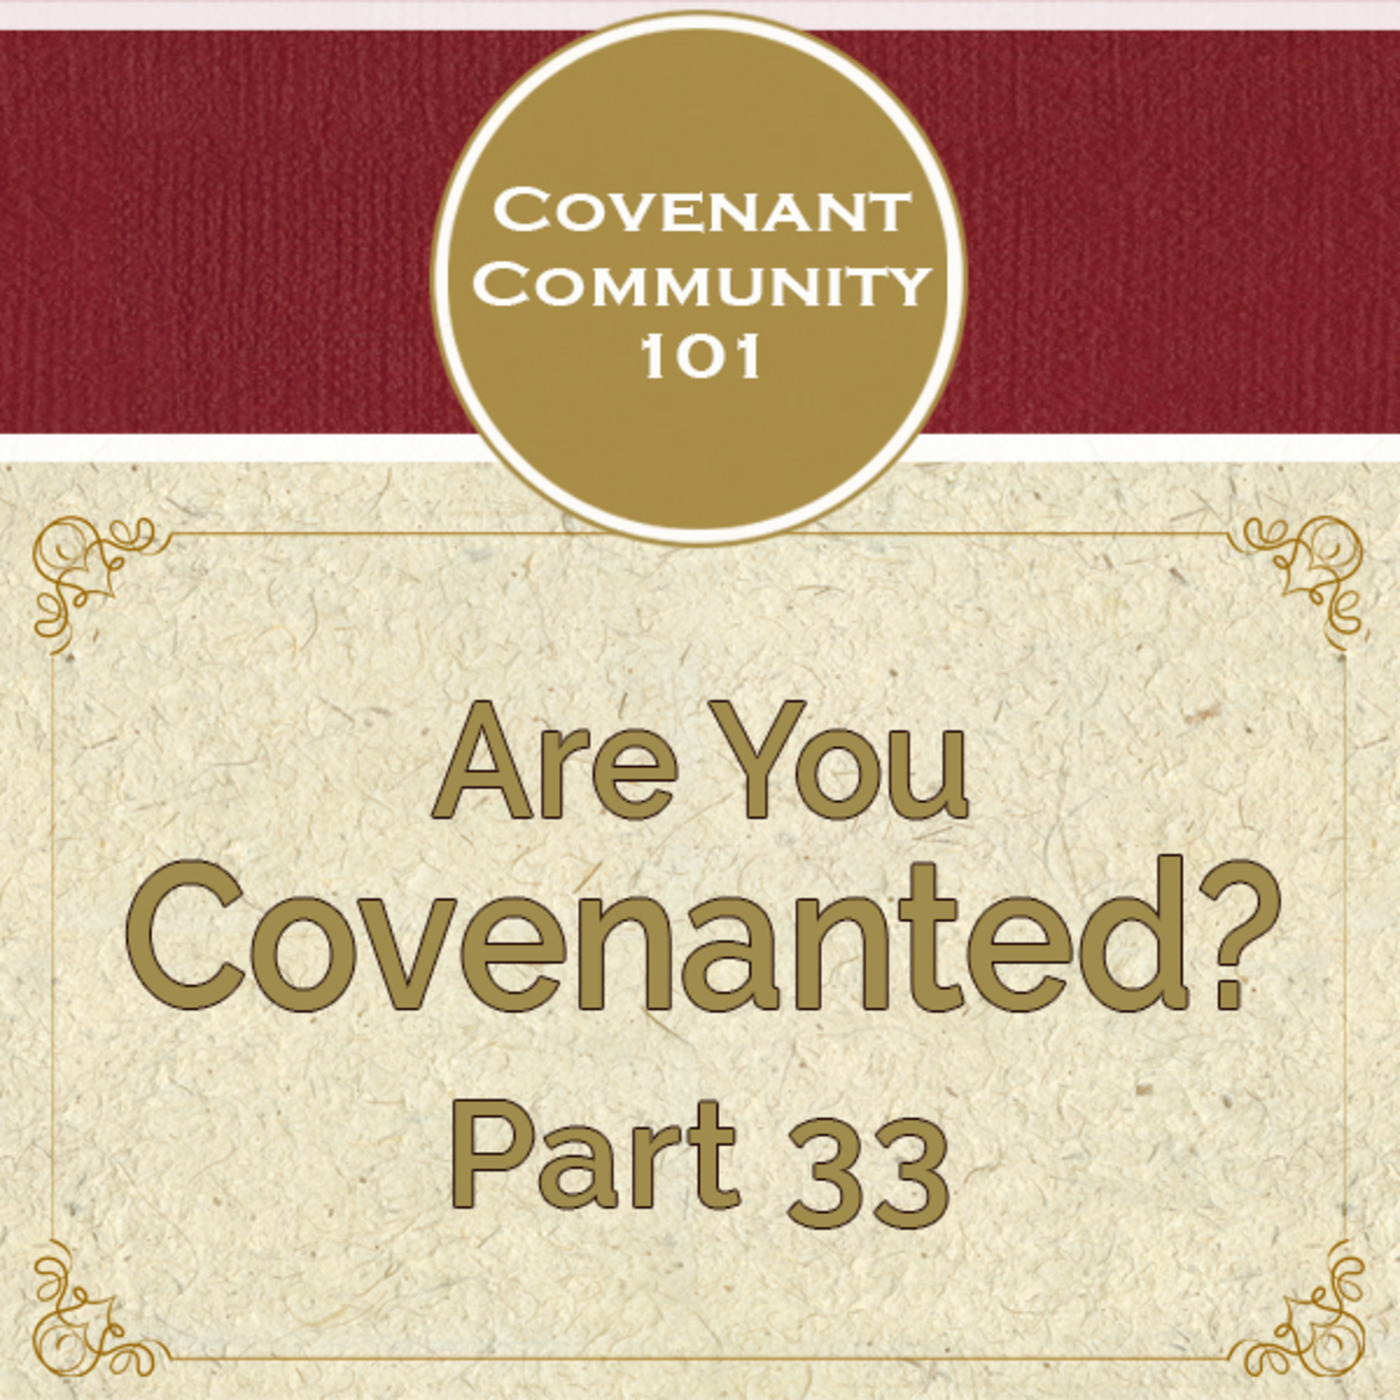 Covenant Community 101: Are You Covenanted? Part 33